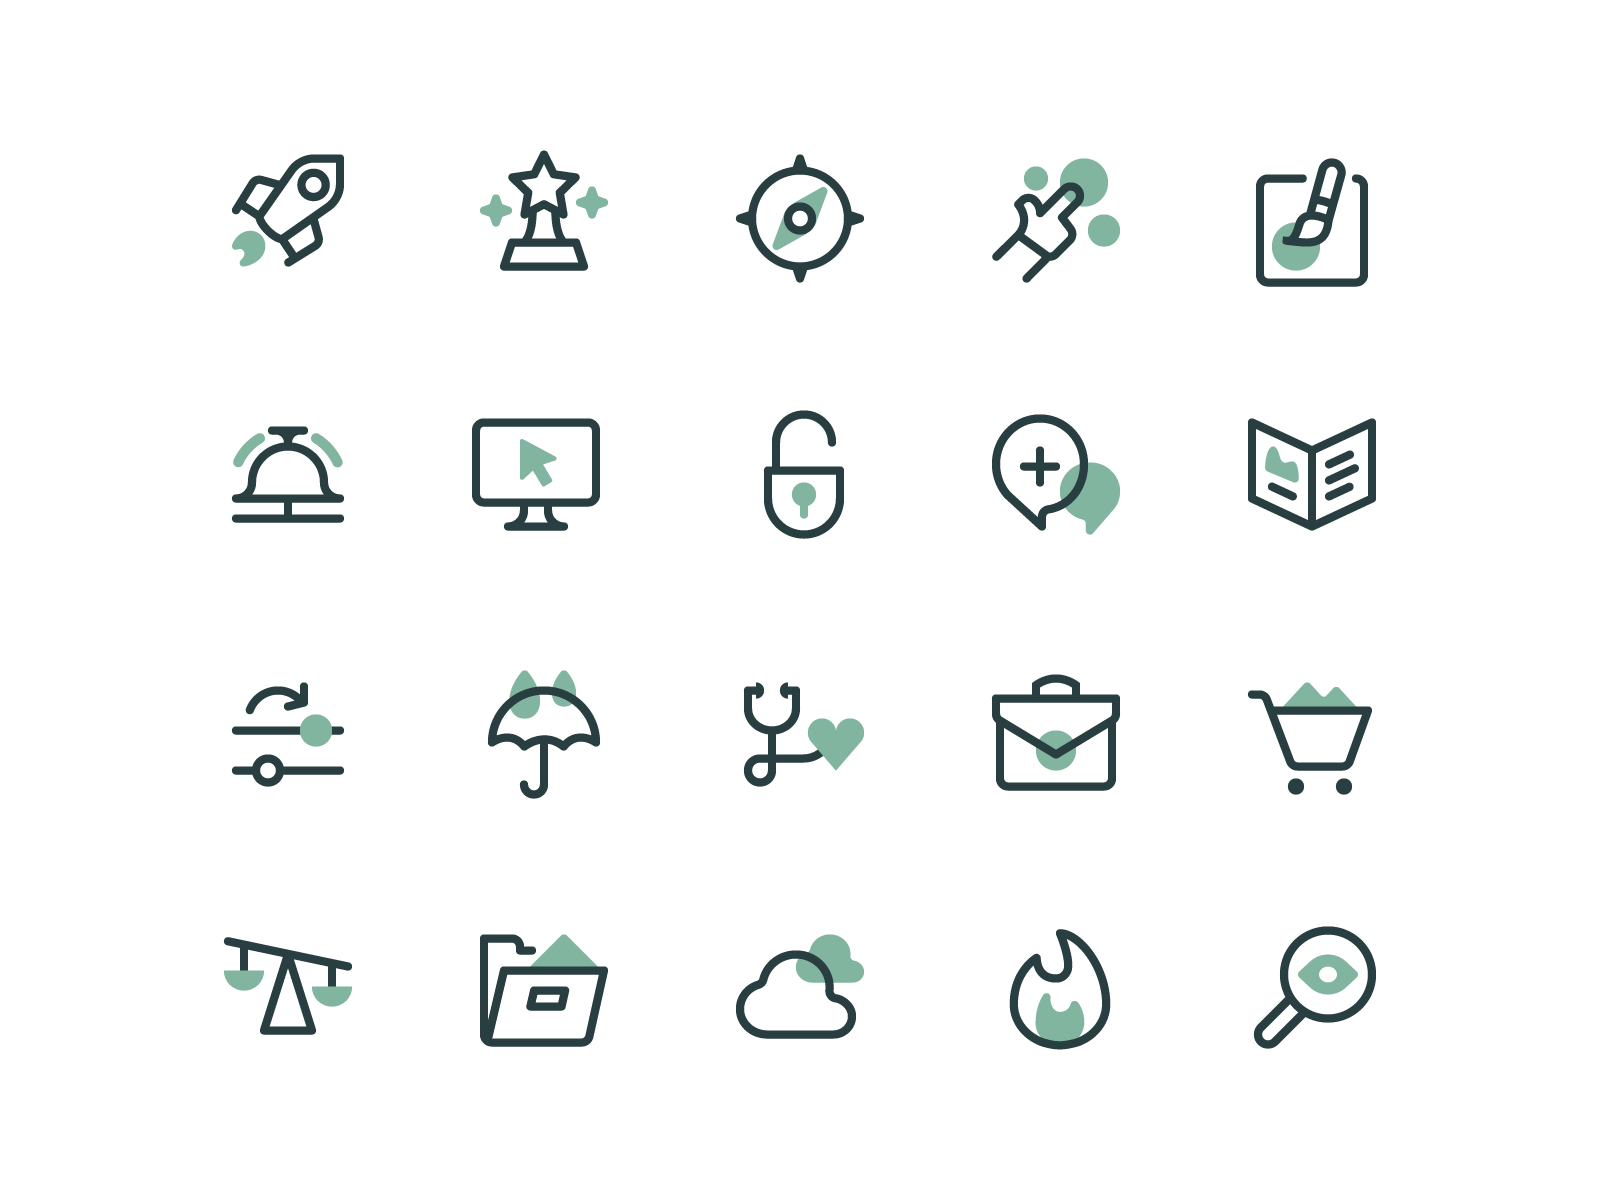 ServiceNow Icon System app icons brand icons case study color icons design system icon designer icon set icon system iconography icons icons design marketing icons servicenow tab bar icons tab icons web icons website icons